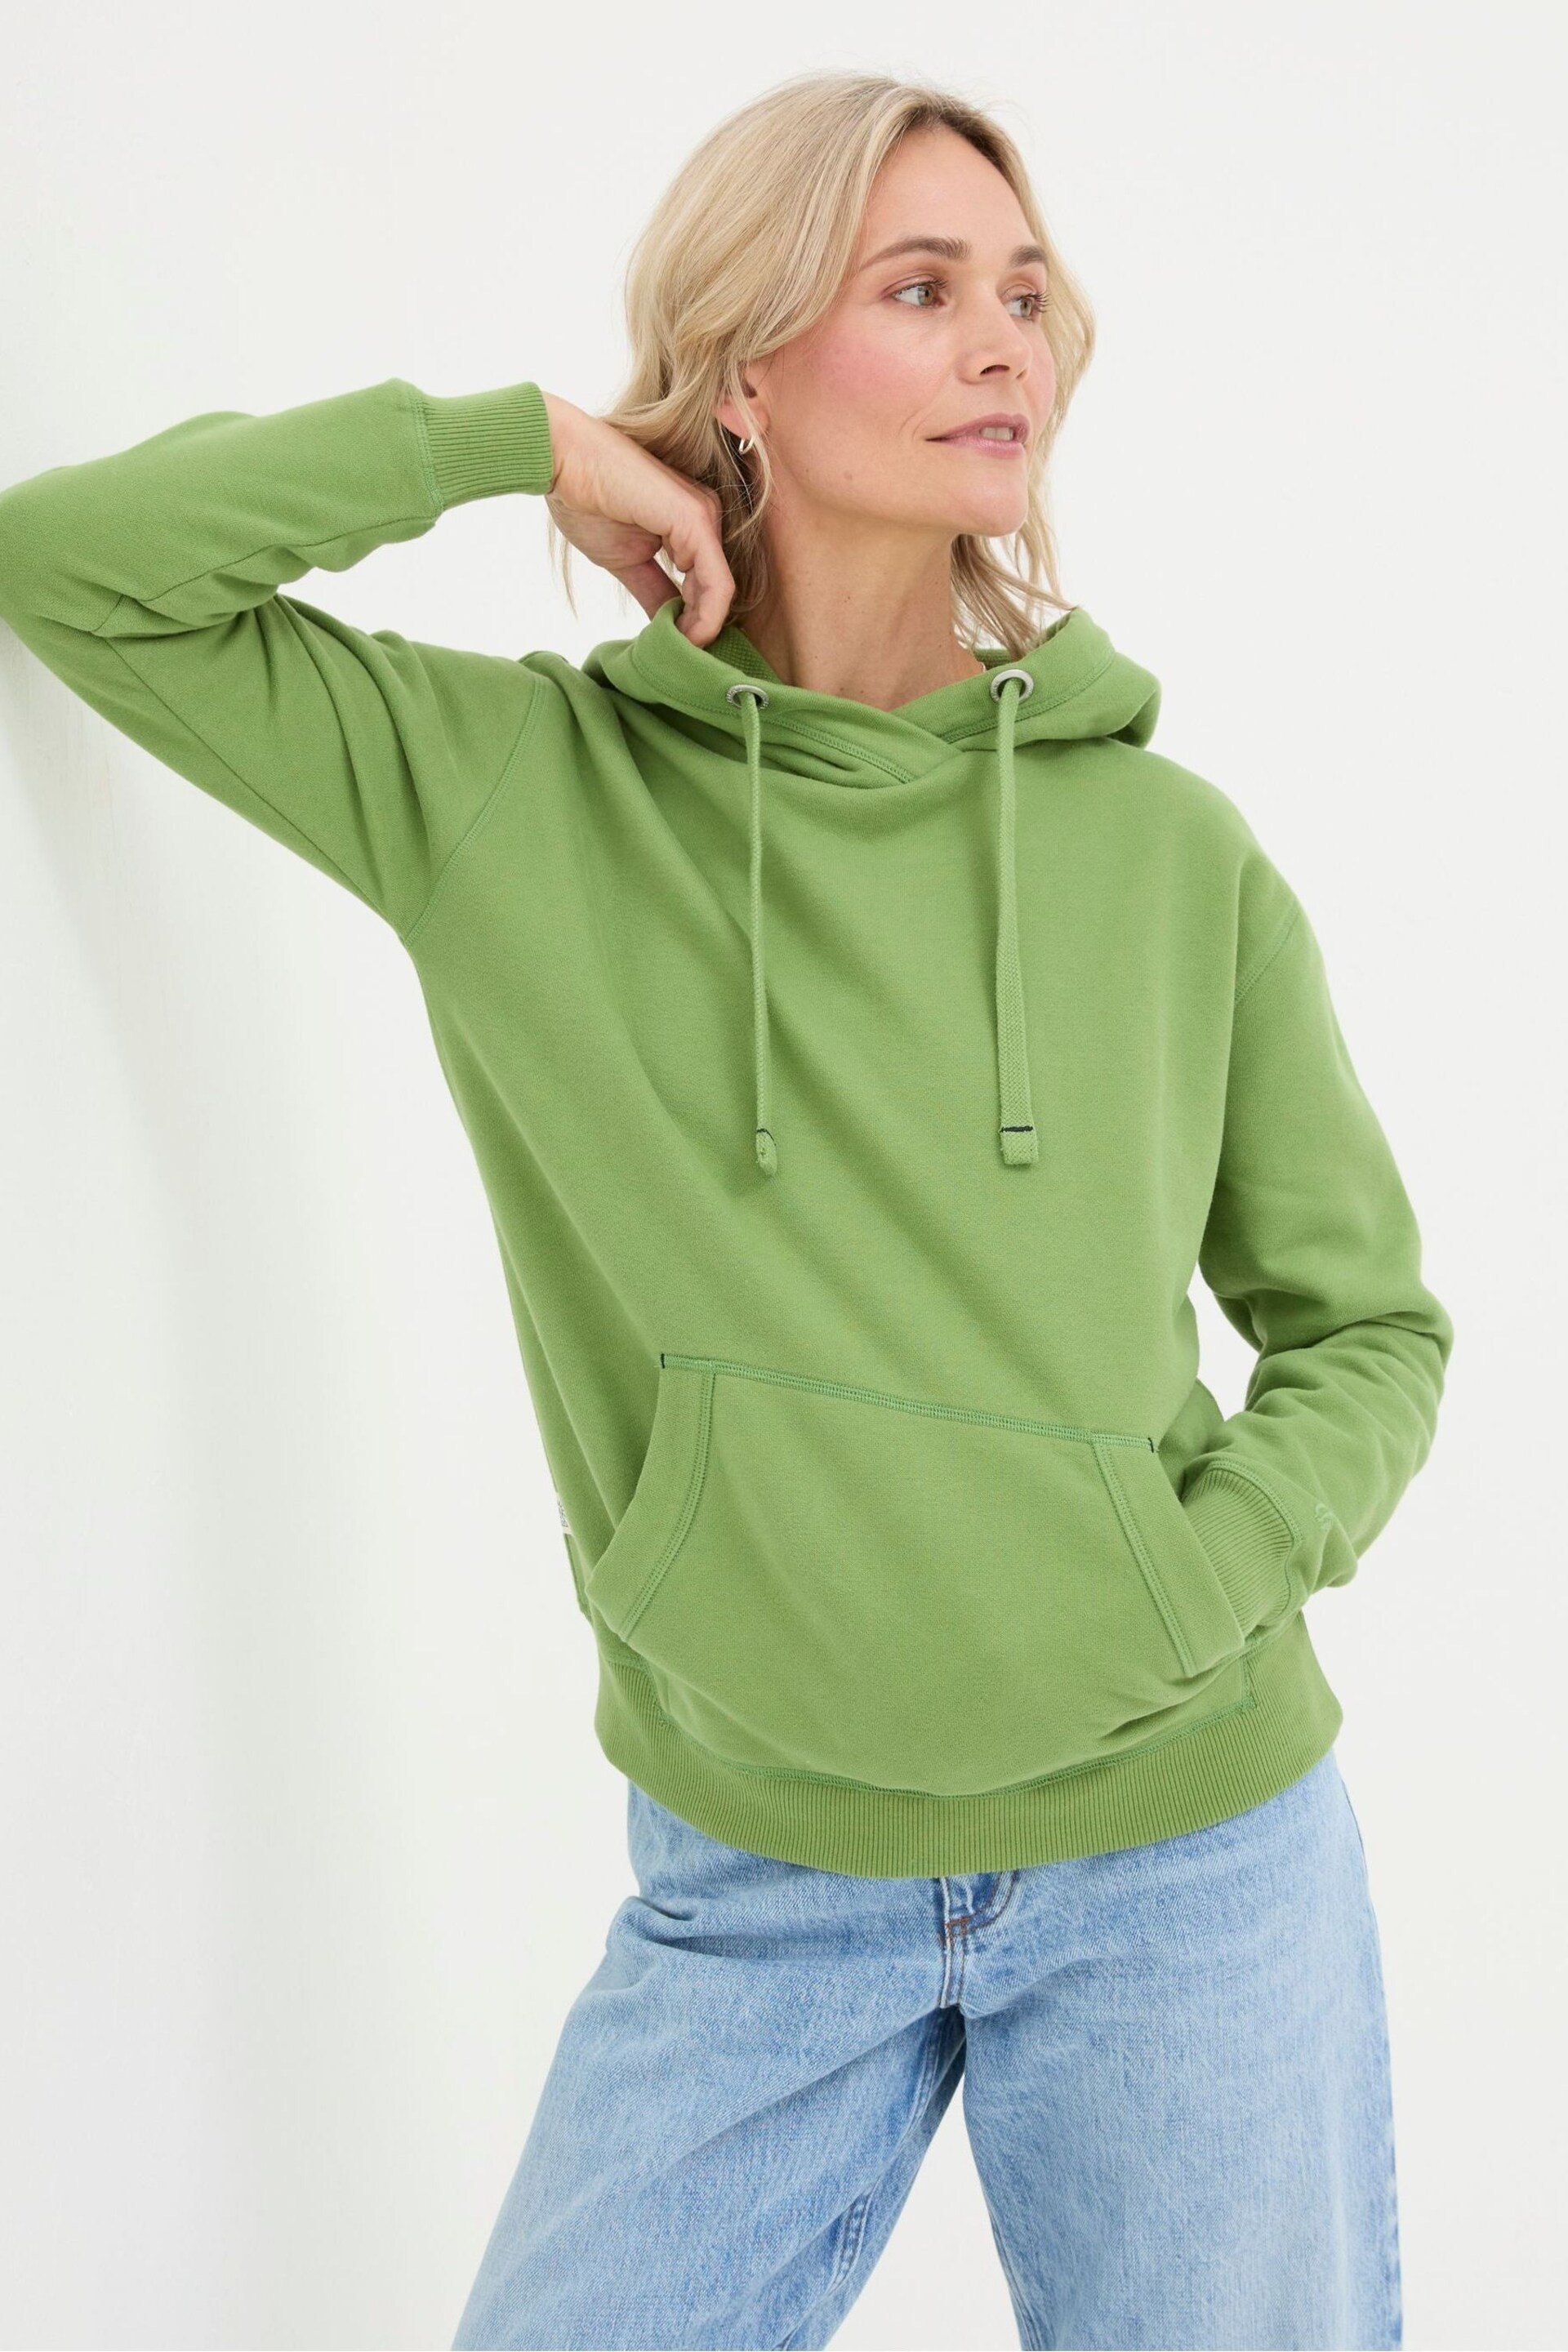 FatFace Green Izzy Overhead Hoodie - Image 1 of 4